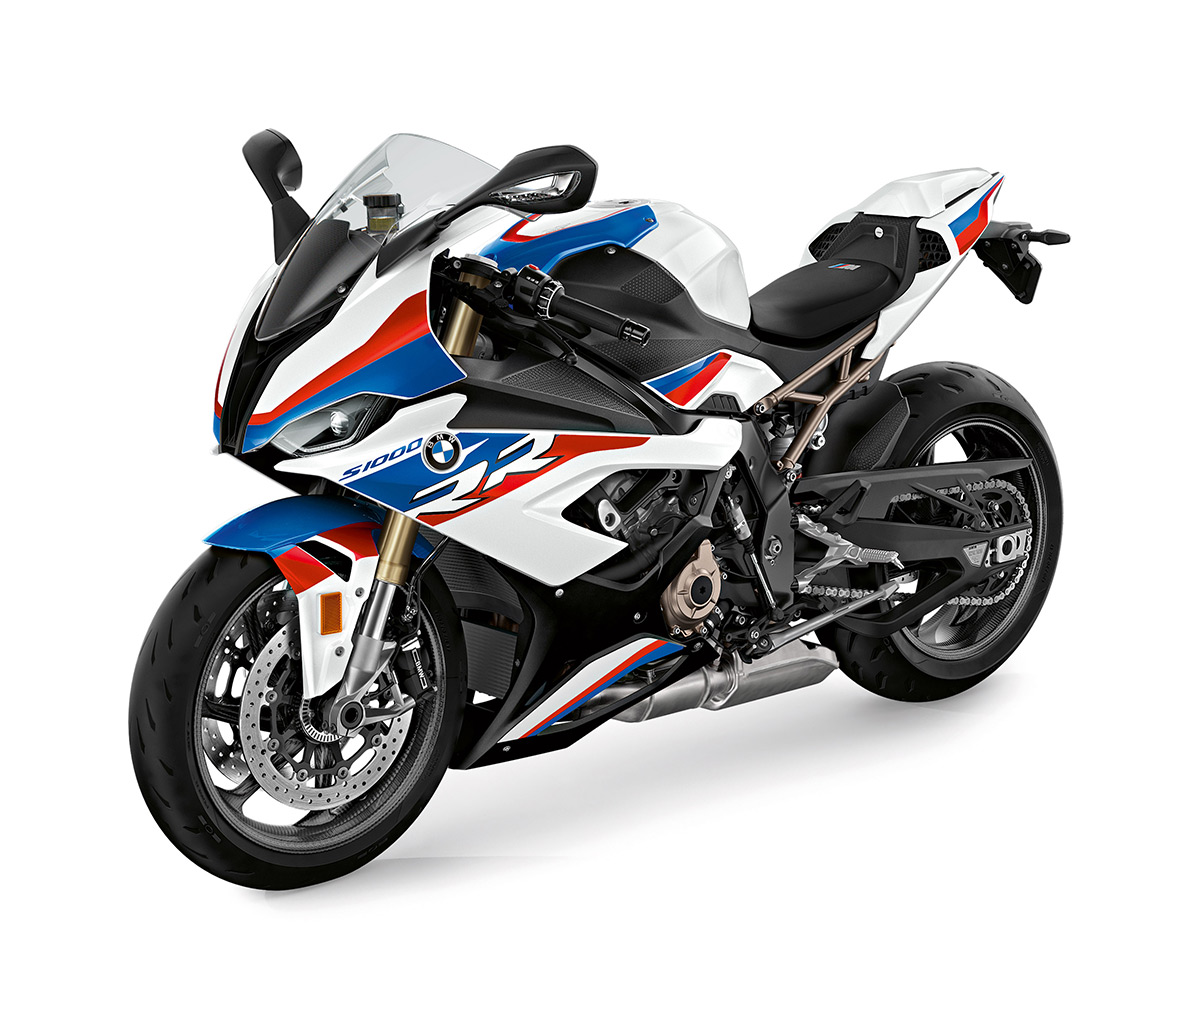 The All New Bmw S 1000 Rr Launched In India